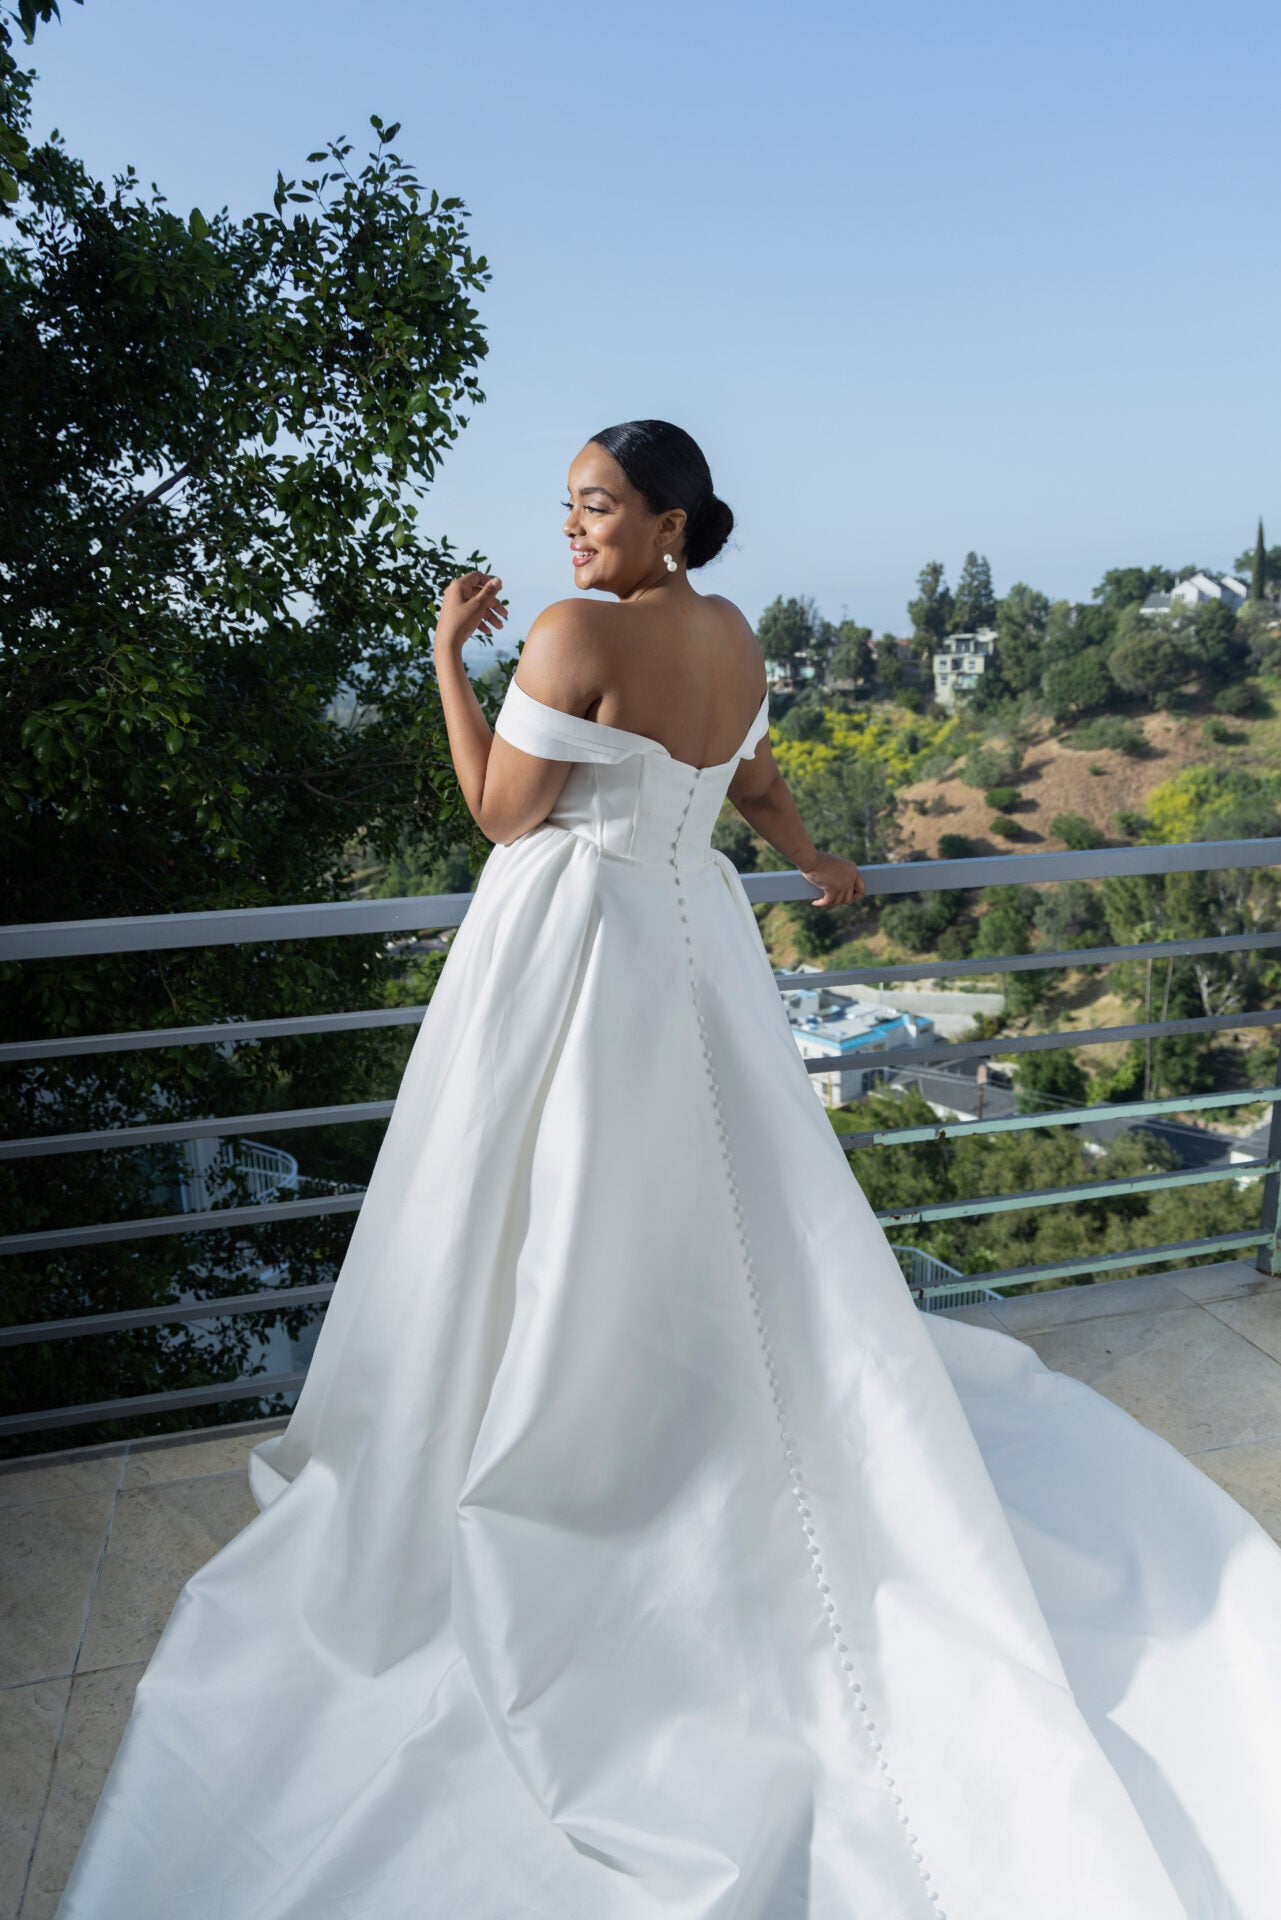 Detachable Off The Shoulder Ball Gown Wedding Dress With Corset Bodice by Martina Liana - Image 2